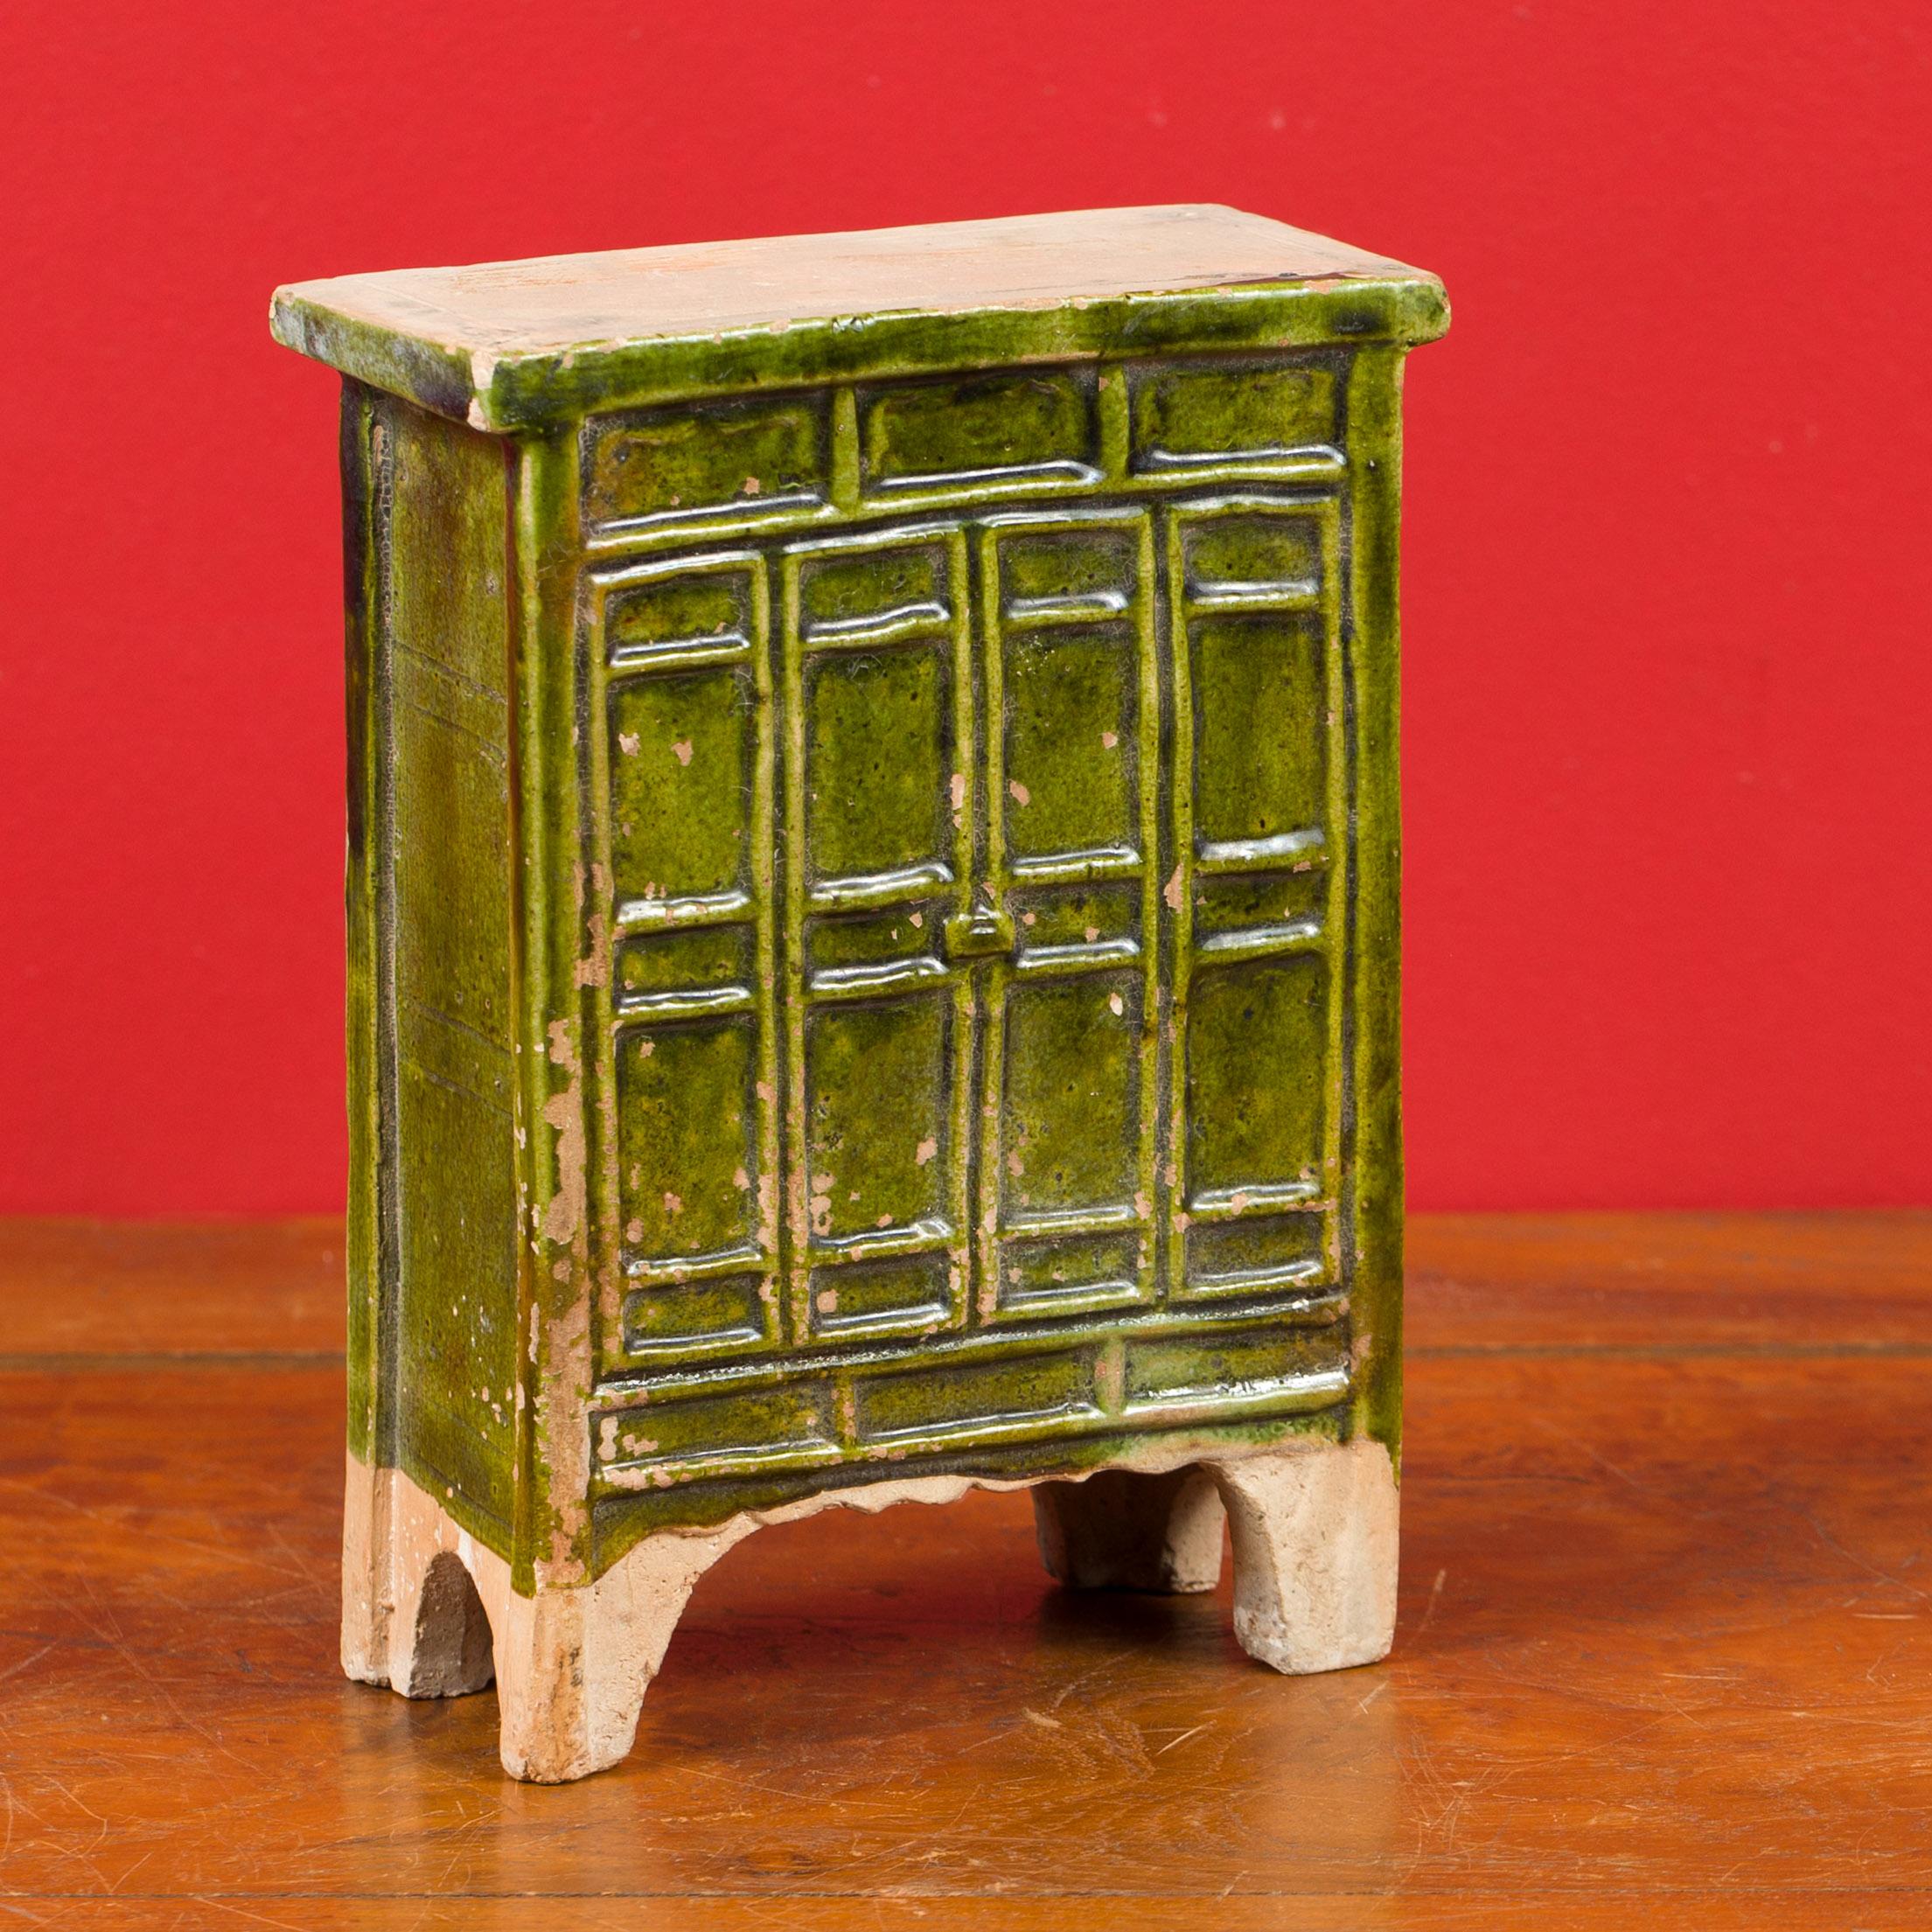 A Chinese Ming Dynasty period miniature terracotta armoire with green glazed finish and bracket feet. Created in China during the Ming Dynasty (1368 - 1644), this miniature terracotta armoire features a simple cornice overhanging a green glazed